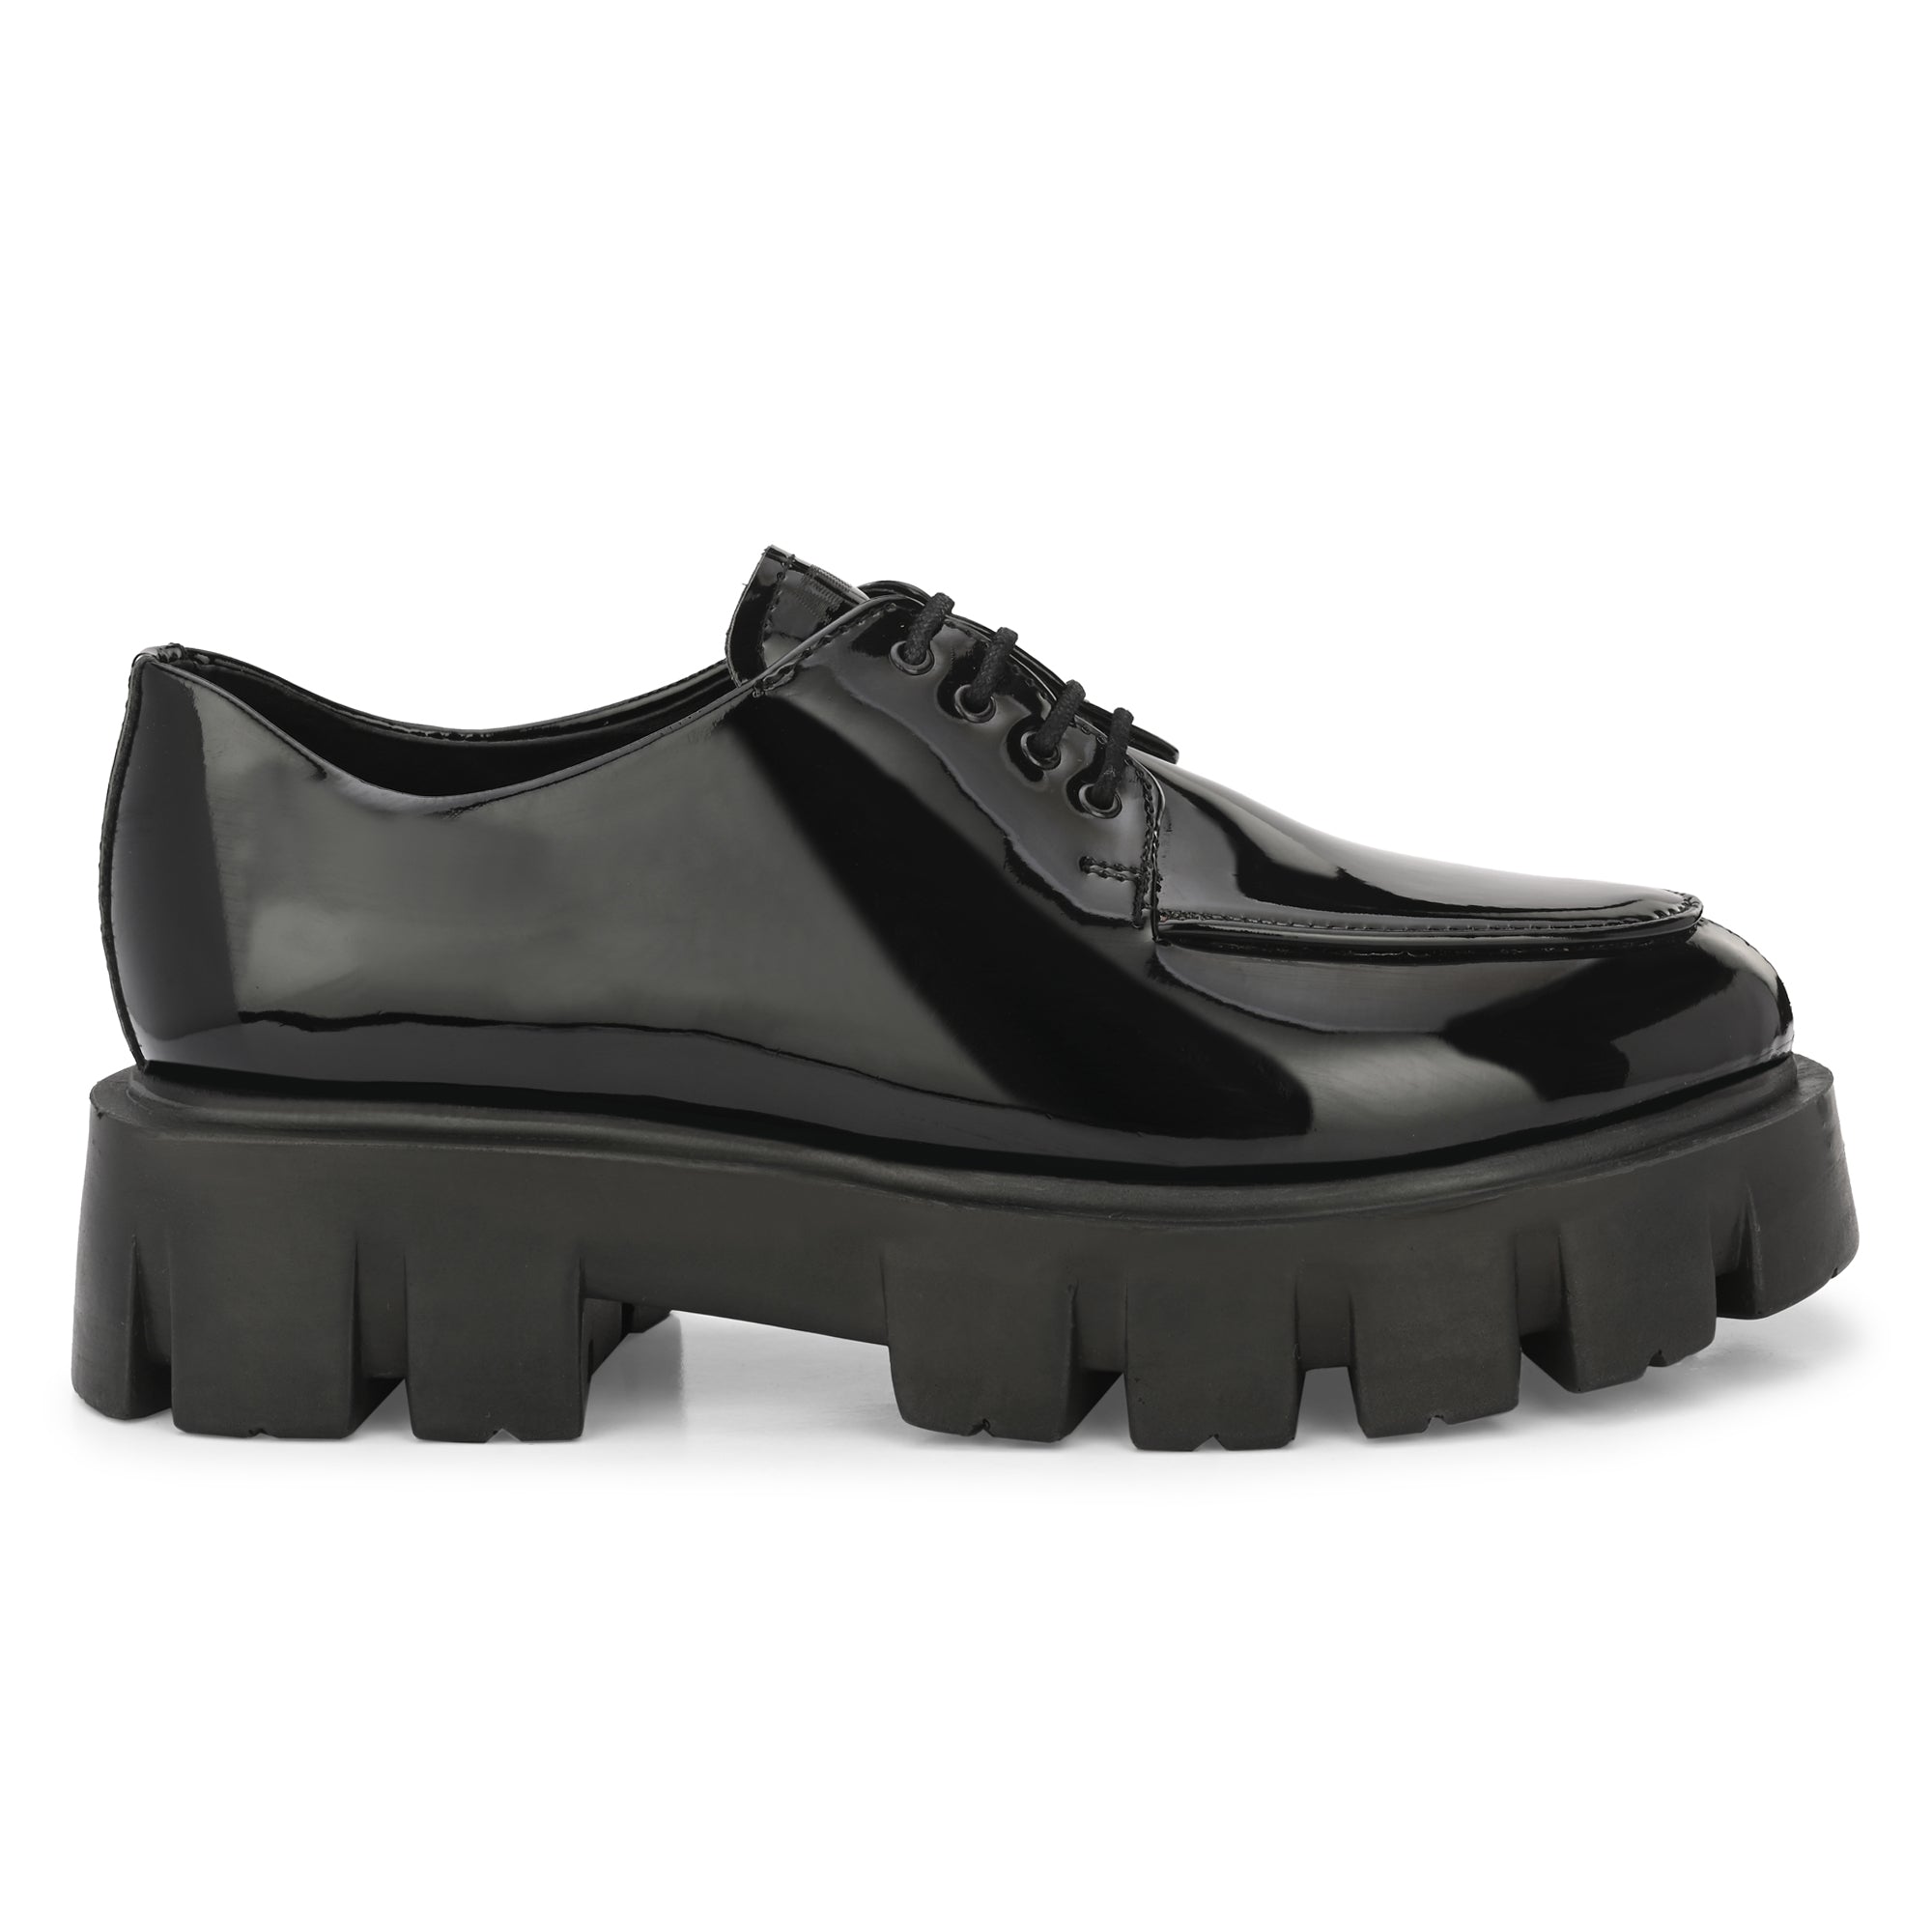 Black Patent Leather Shoes – Walk Tall